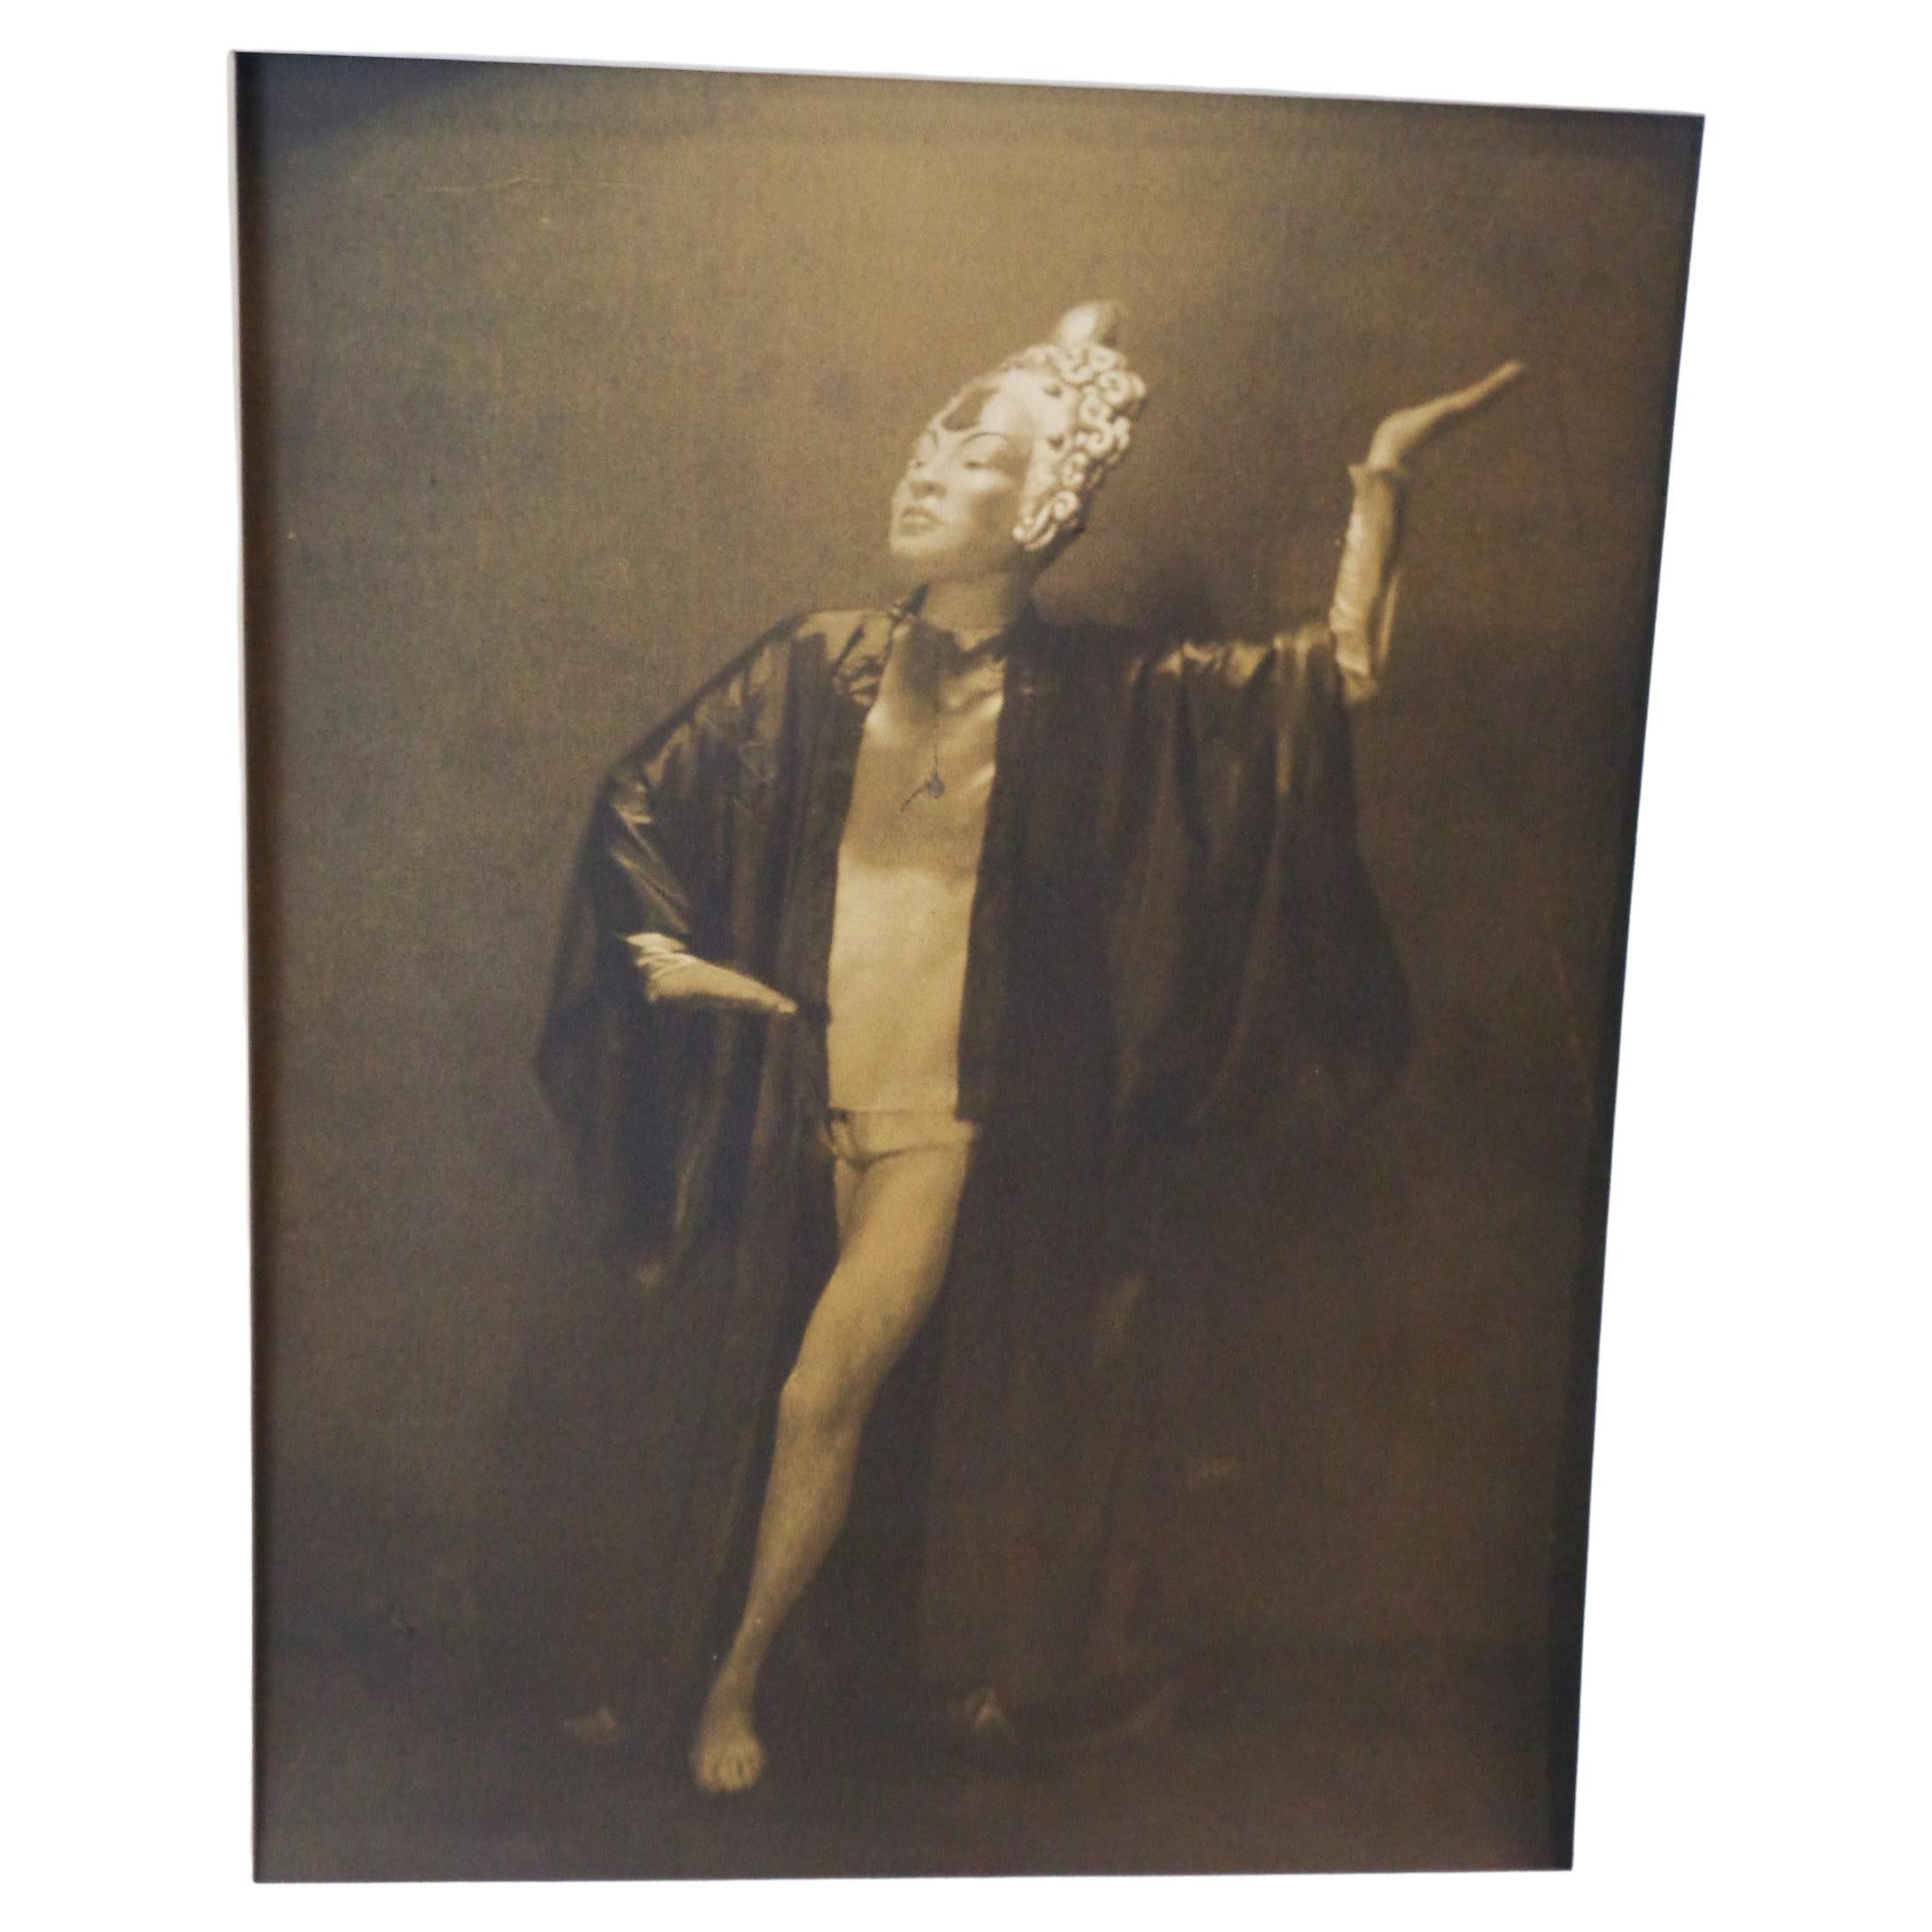 Original Pictorialist Sepia Tone Gelatin Silver Print Photograph Exotic Dancer In Good Condition For Sale In Rochester, NY